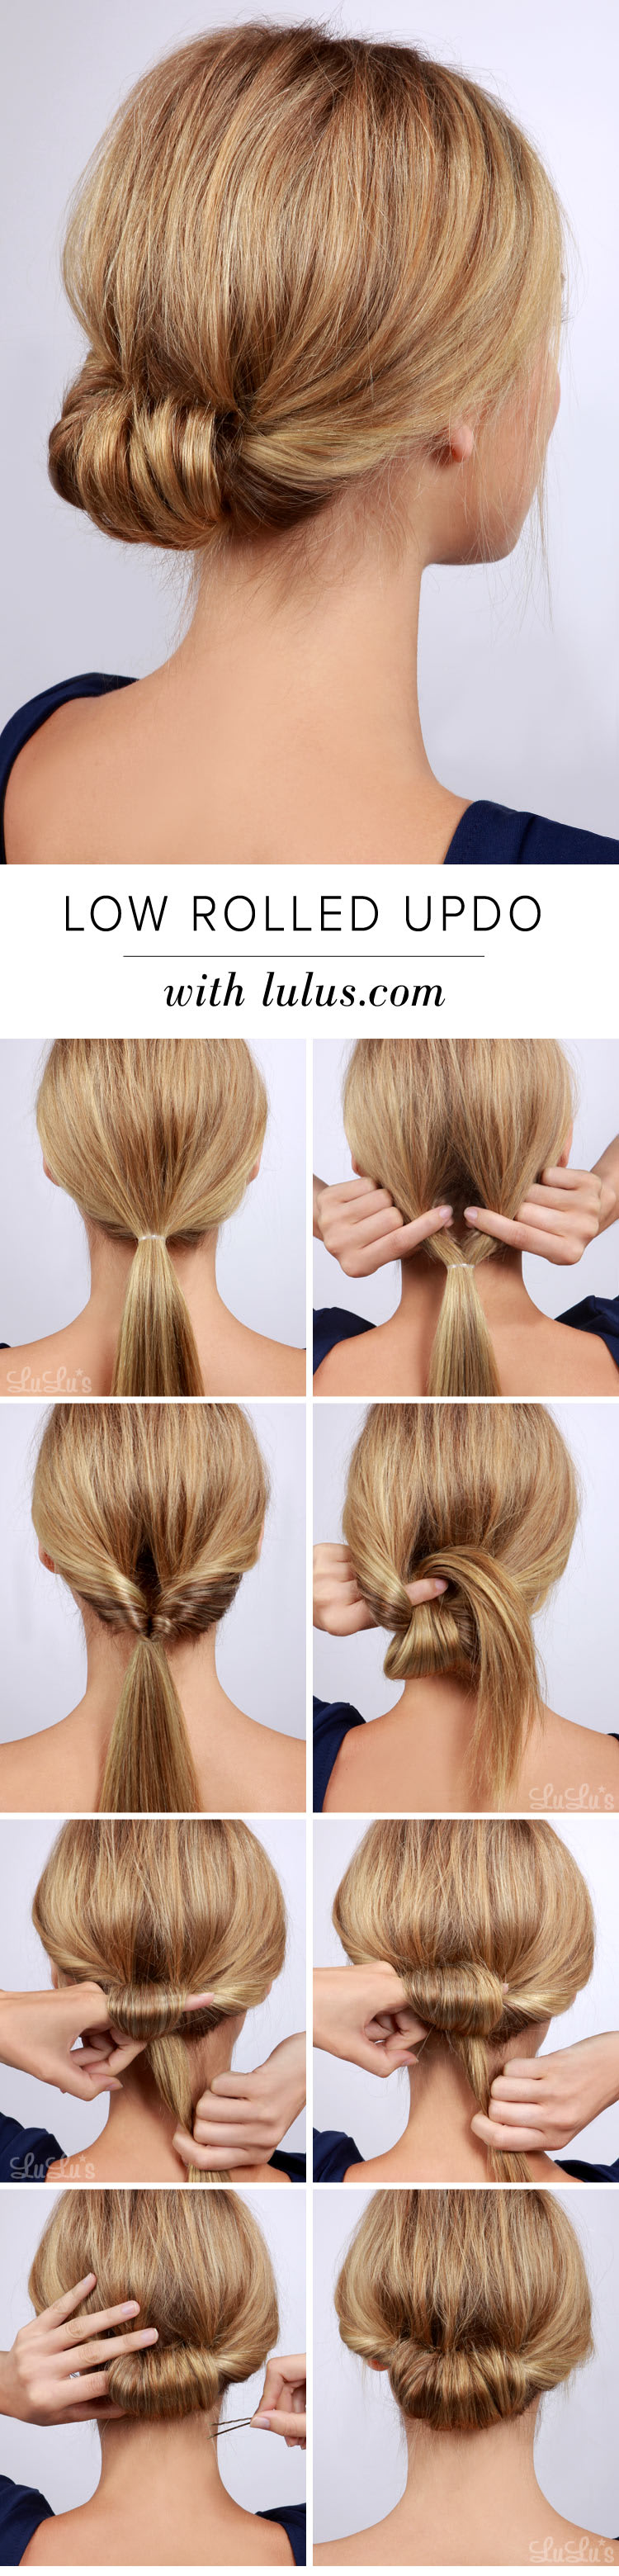 Lulus How-To: Low Rolled Updo Hair Tutorial - Lulus.com Fashion Blog